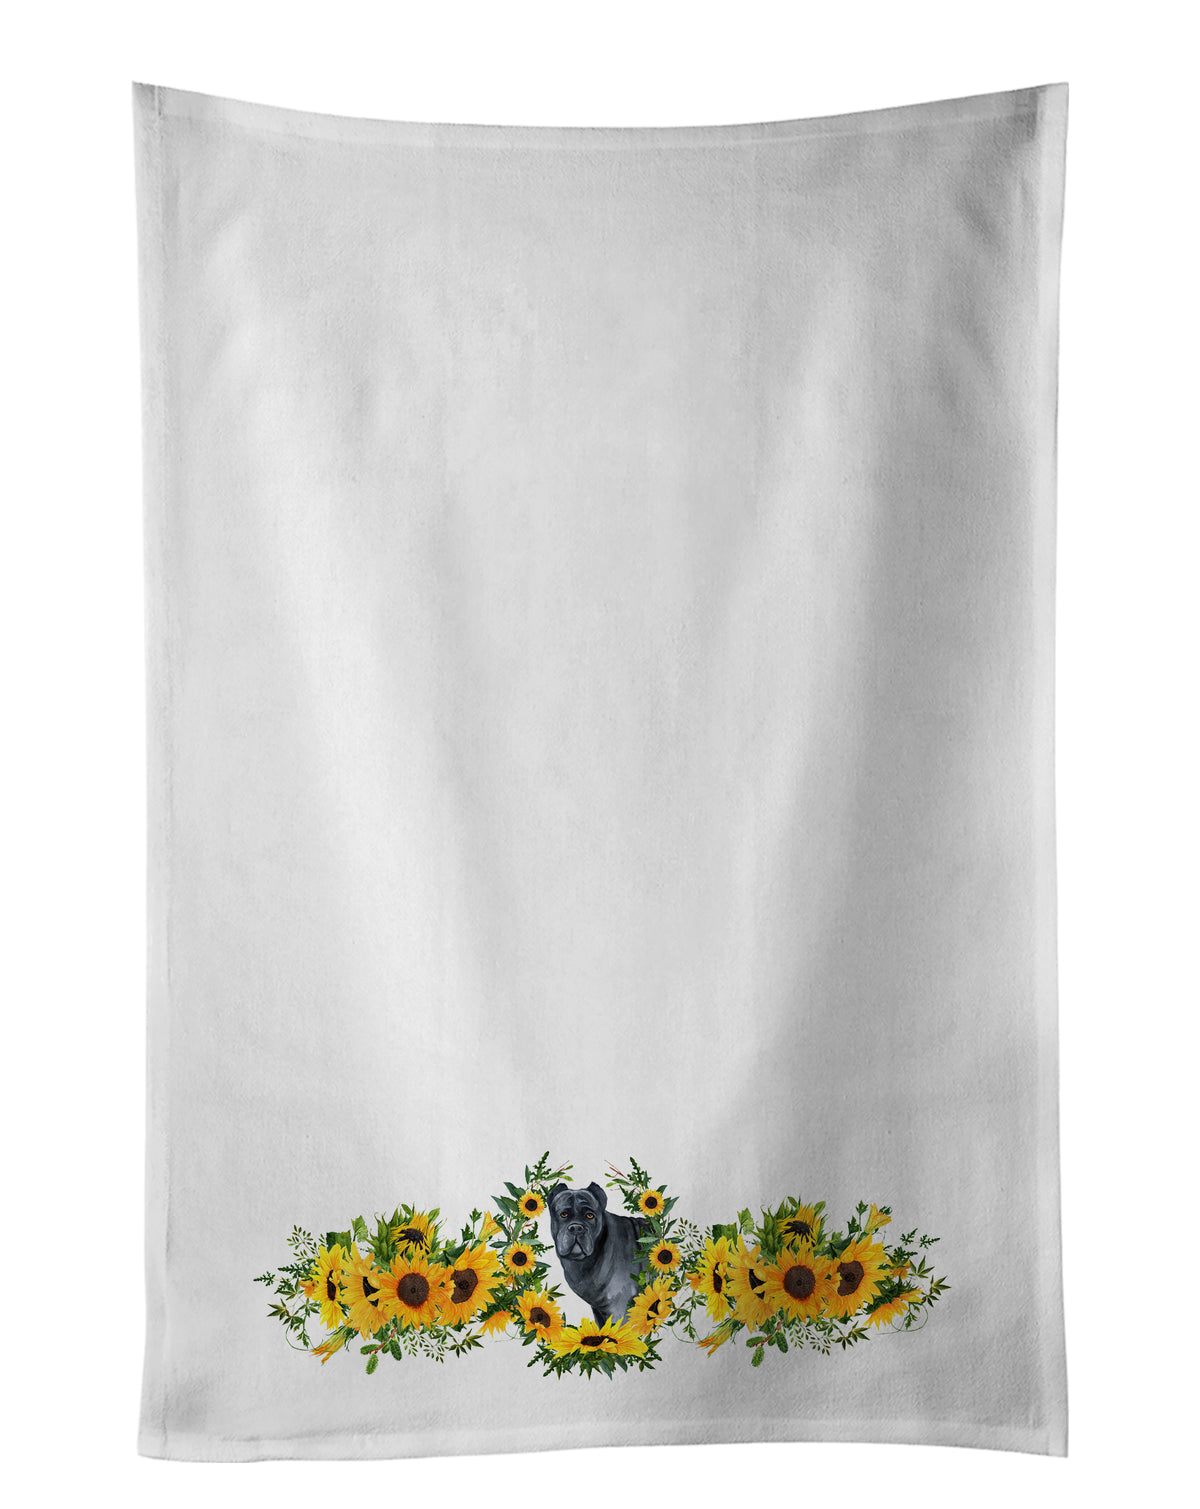 Buy this Cane Corso in Sunflowers White Kitchen Towel Set of 2